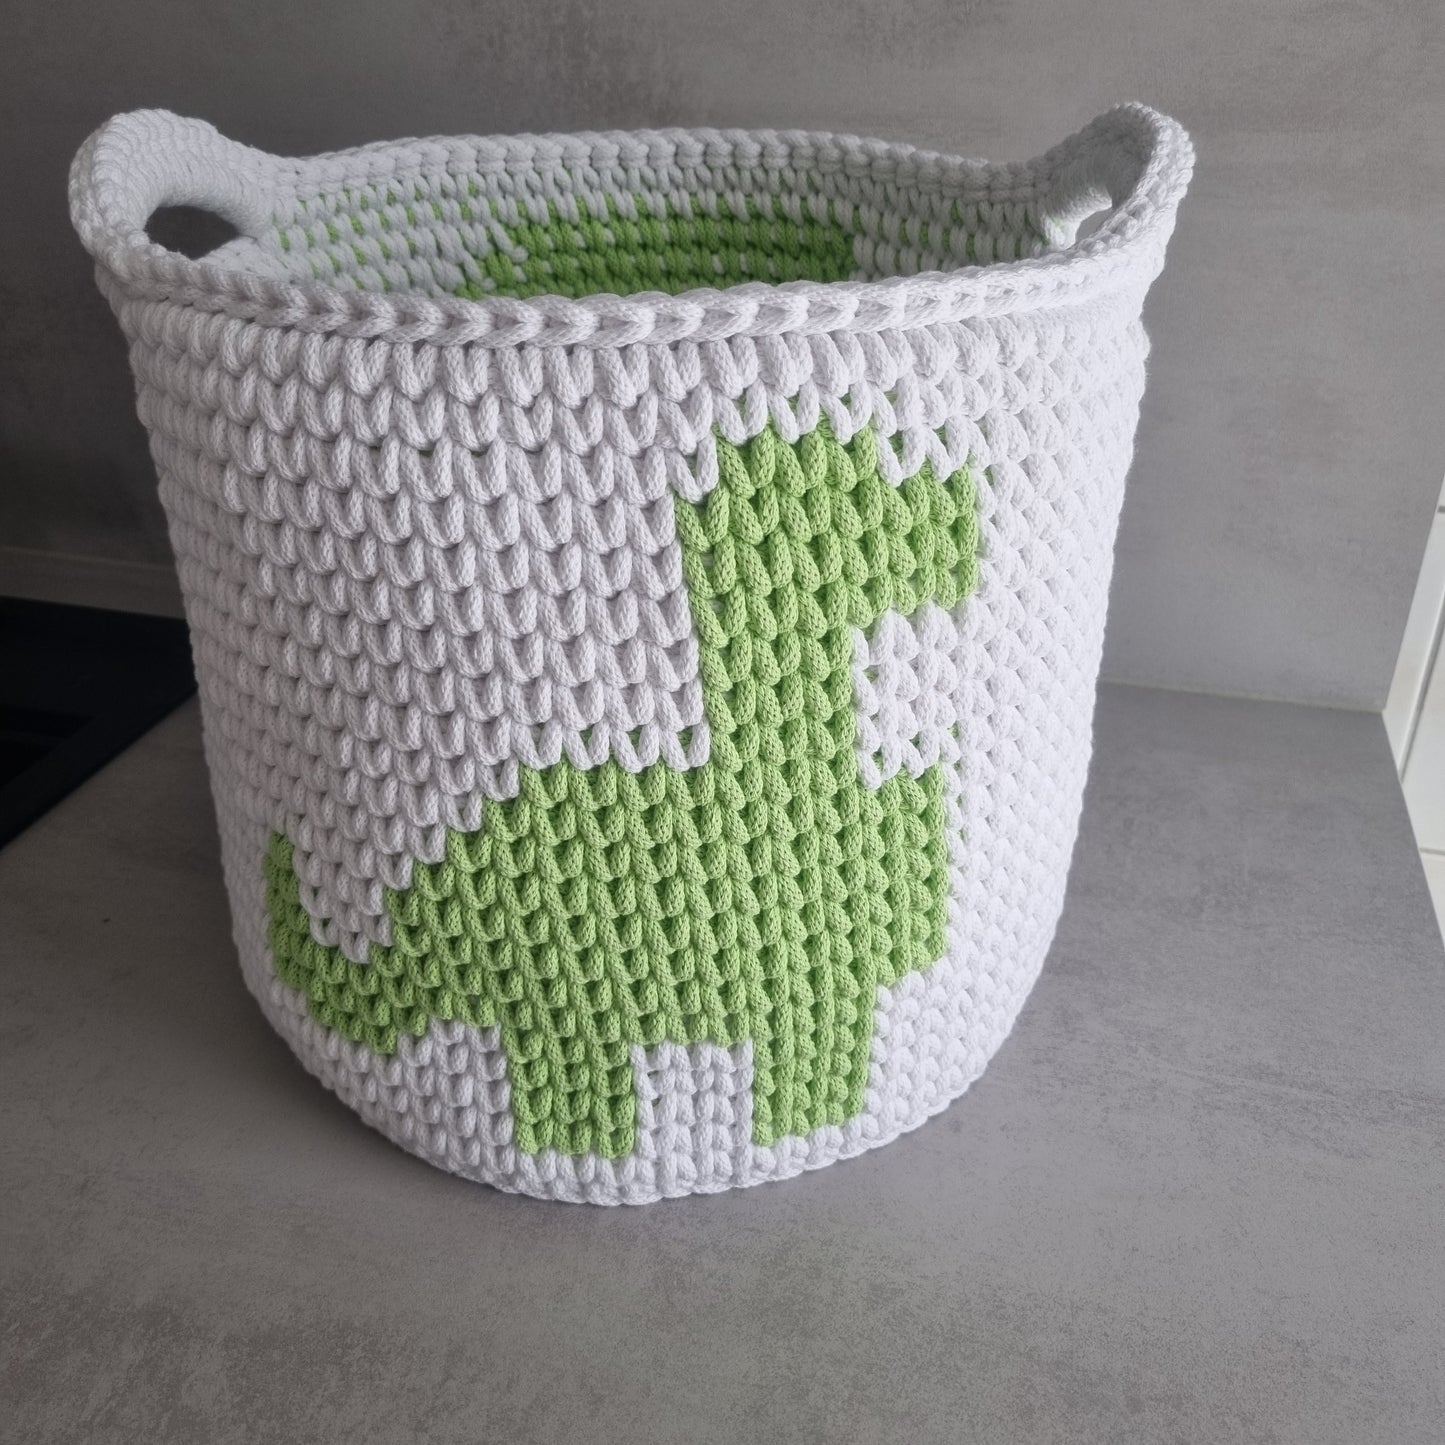 Children's room Baby room Toy basket crocheted from recycled cotton